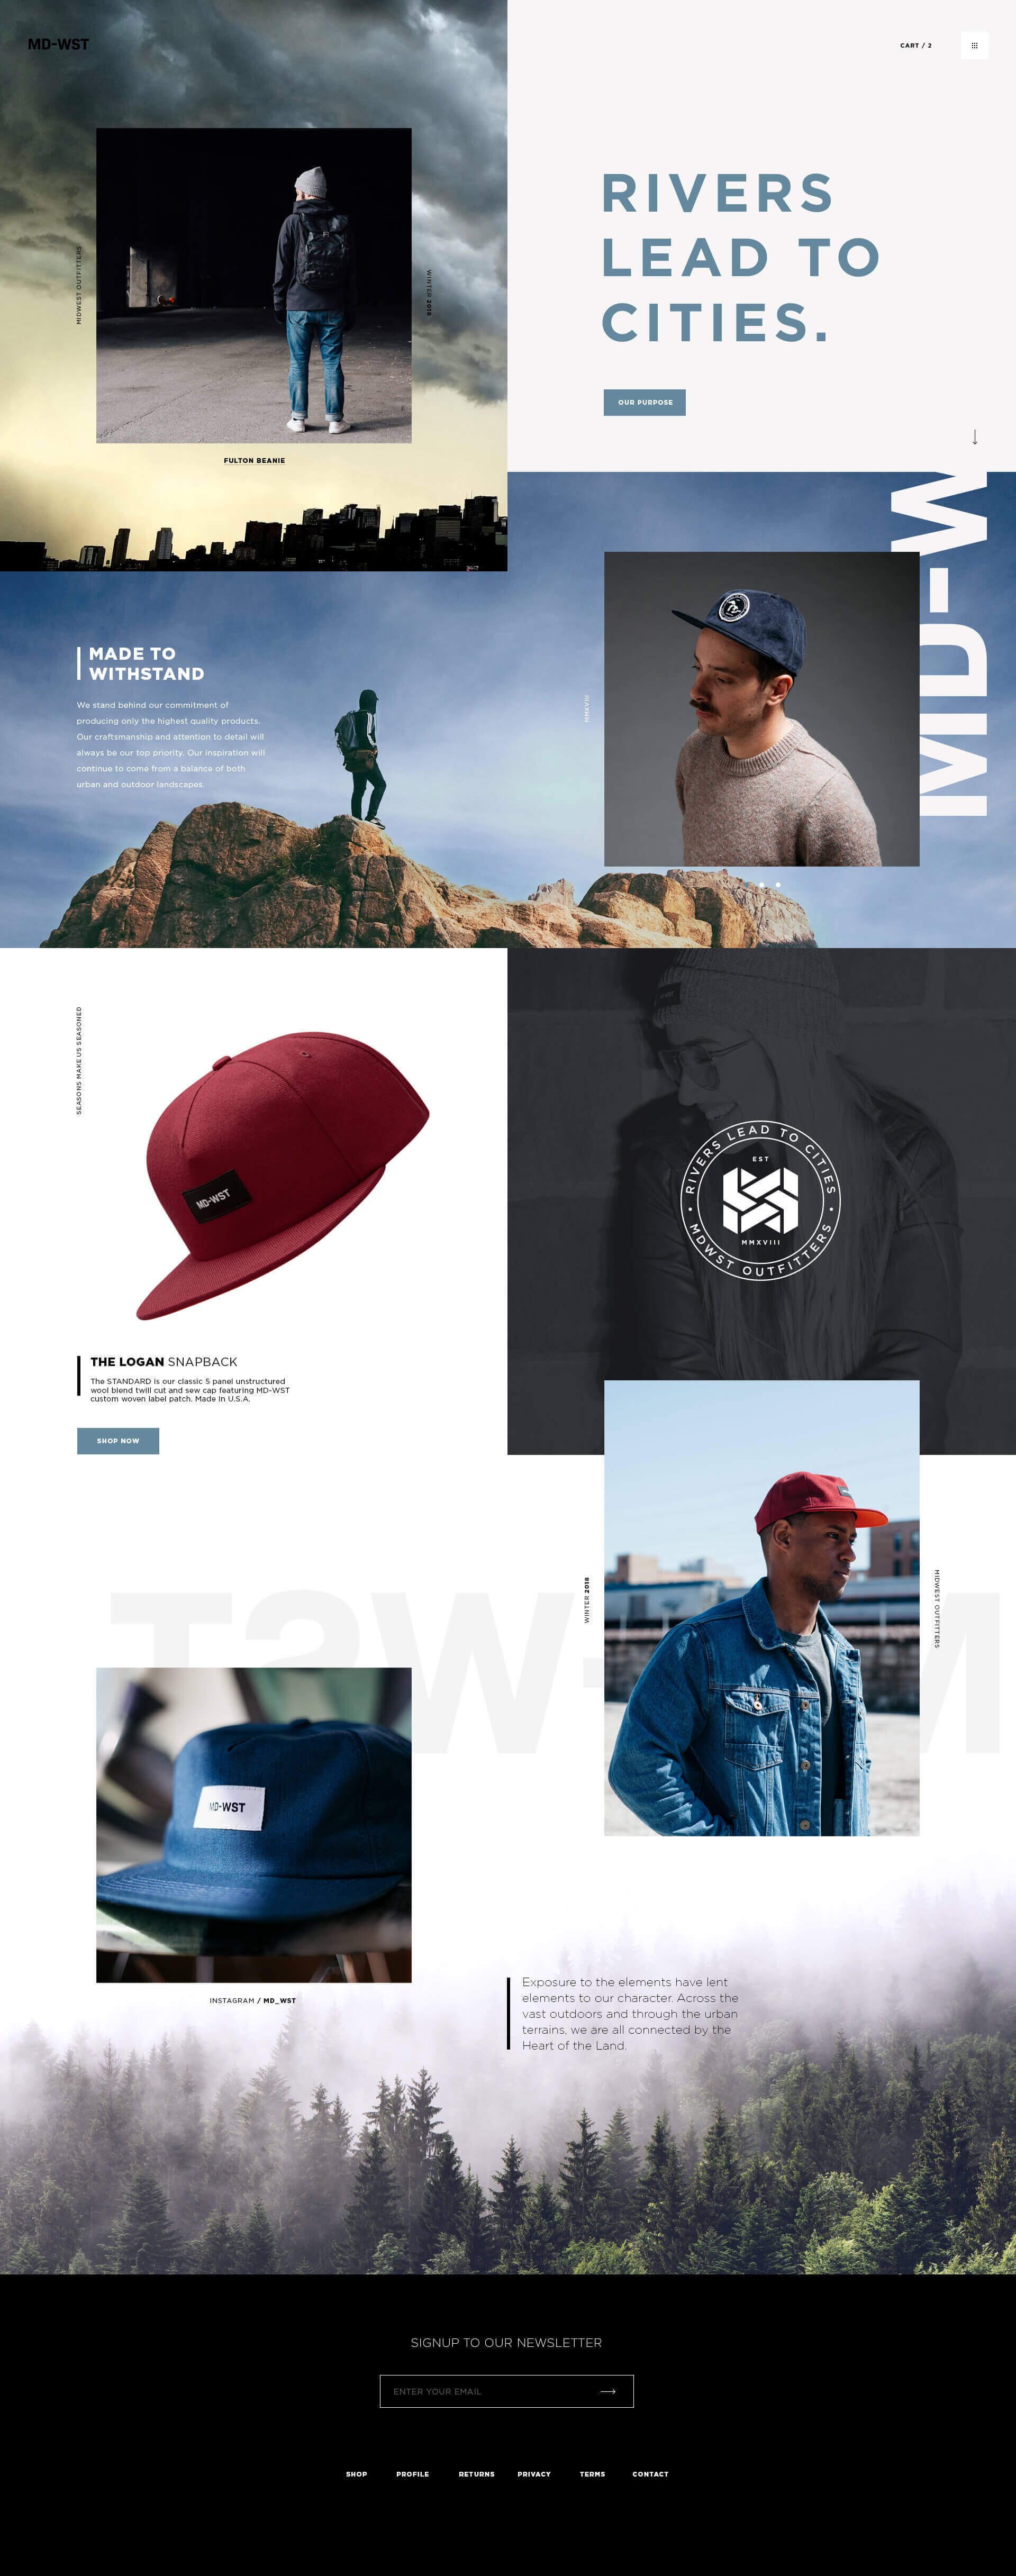 MD-WST Outfitters by Reakt